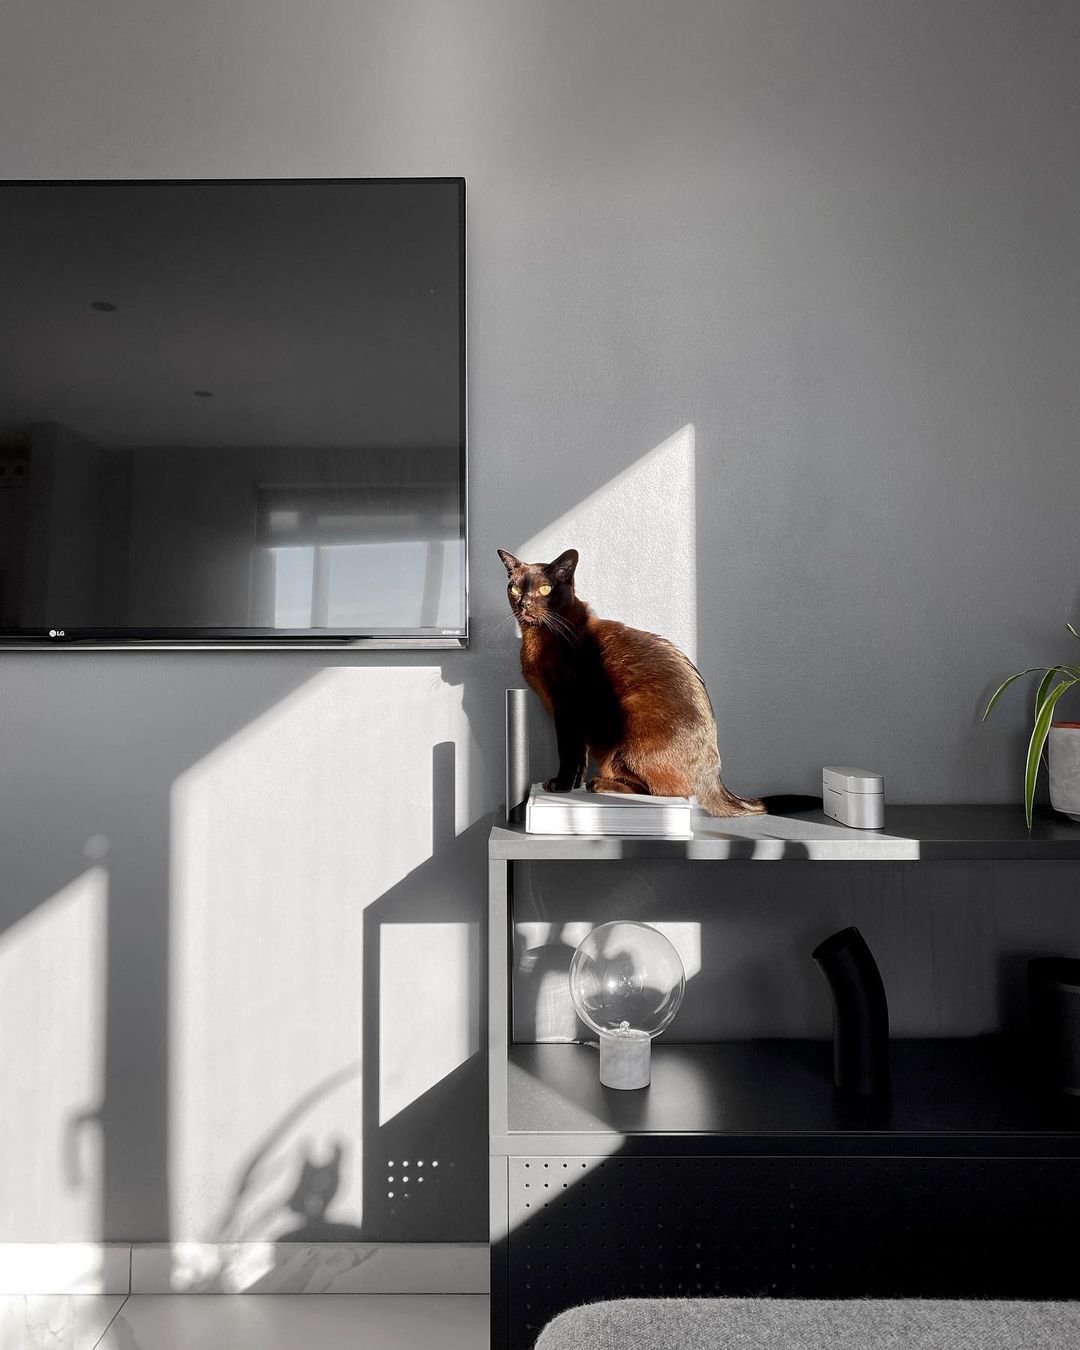 A cat sitting on the sideboard